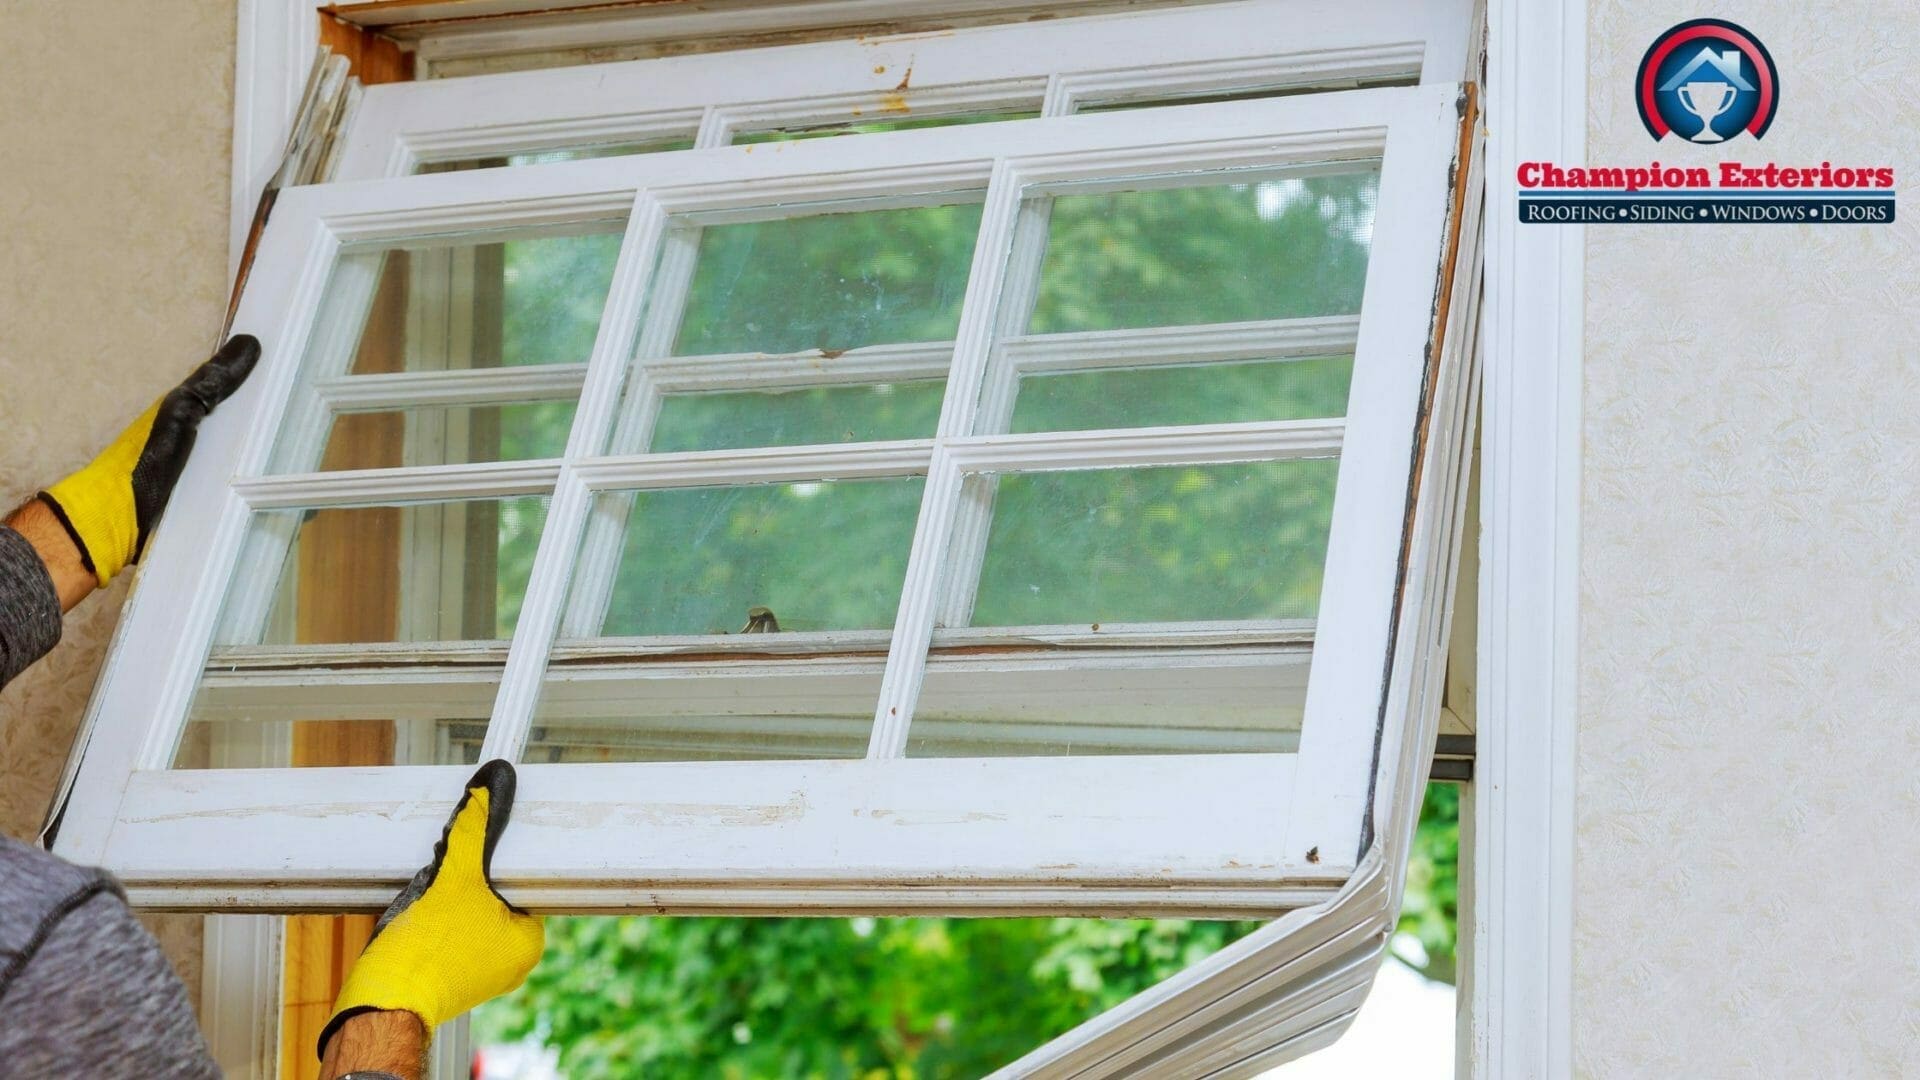 5 Best Replacement Windows You Can Buy in 2022